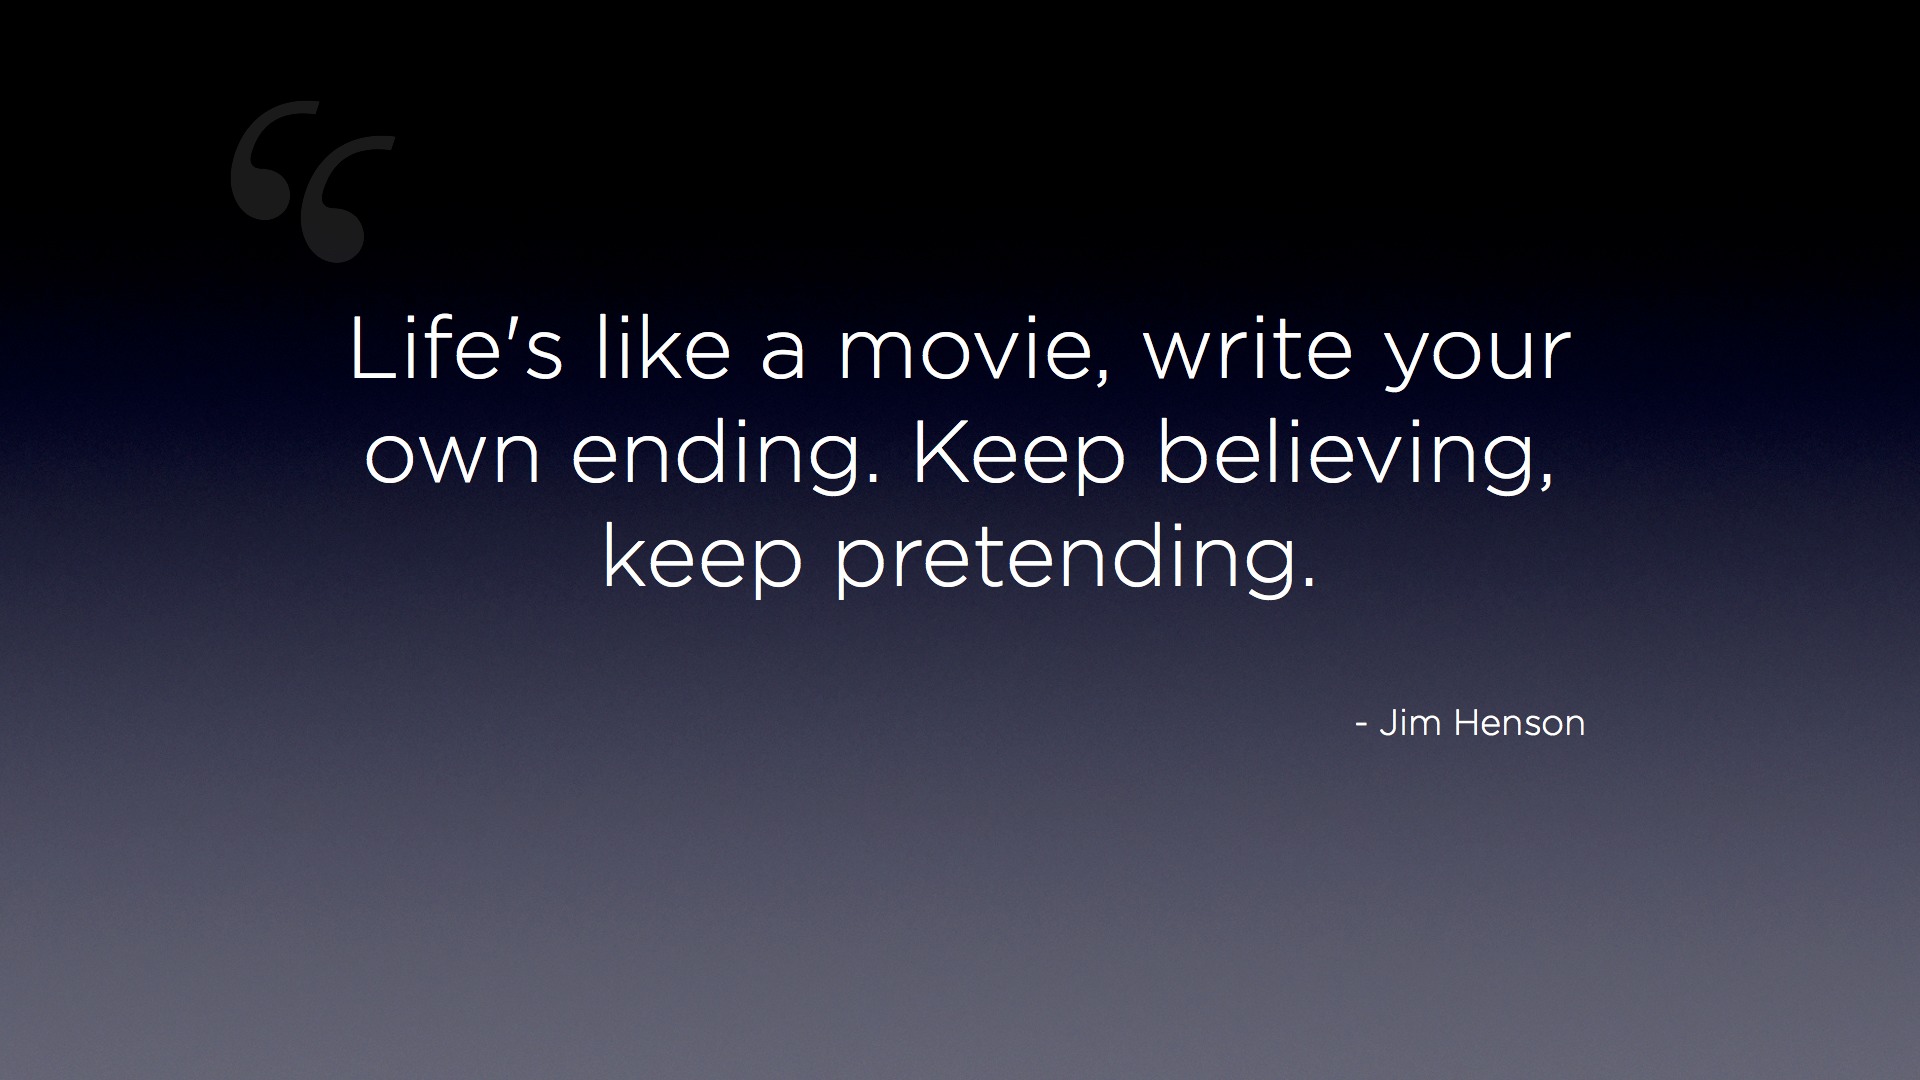 Life's like a movie, write your own ending. Keep believing, keep pretending. - Jim Henson